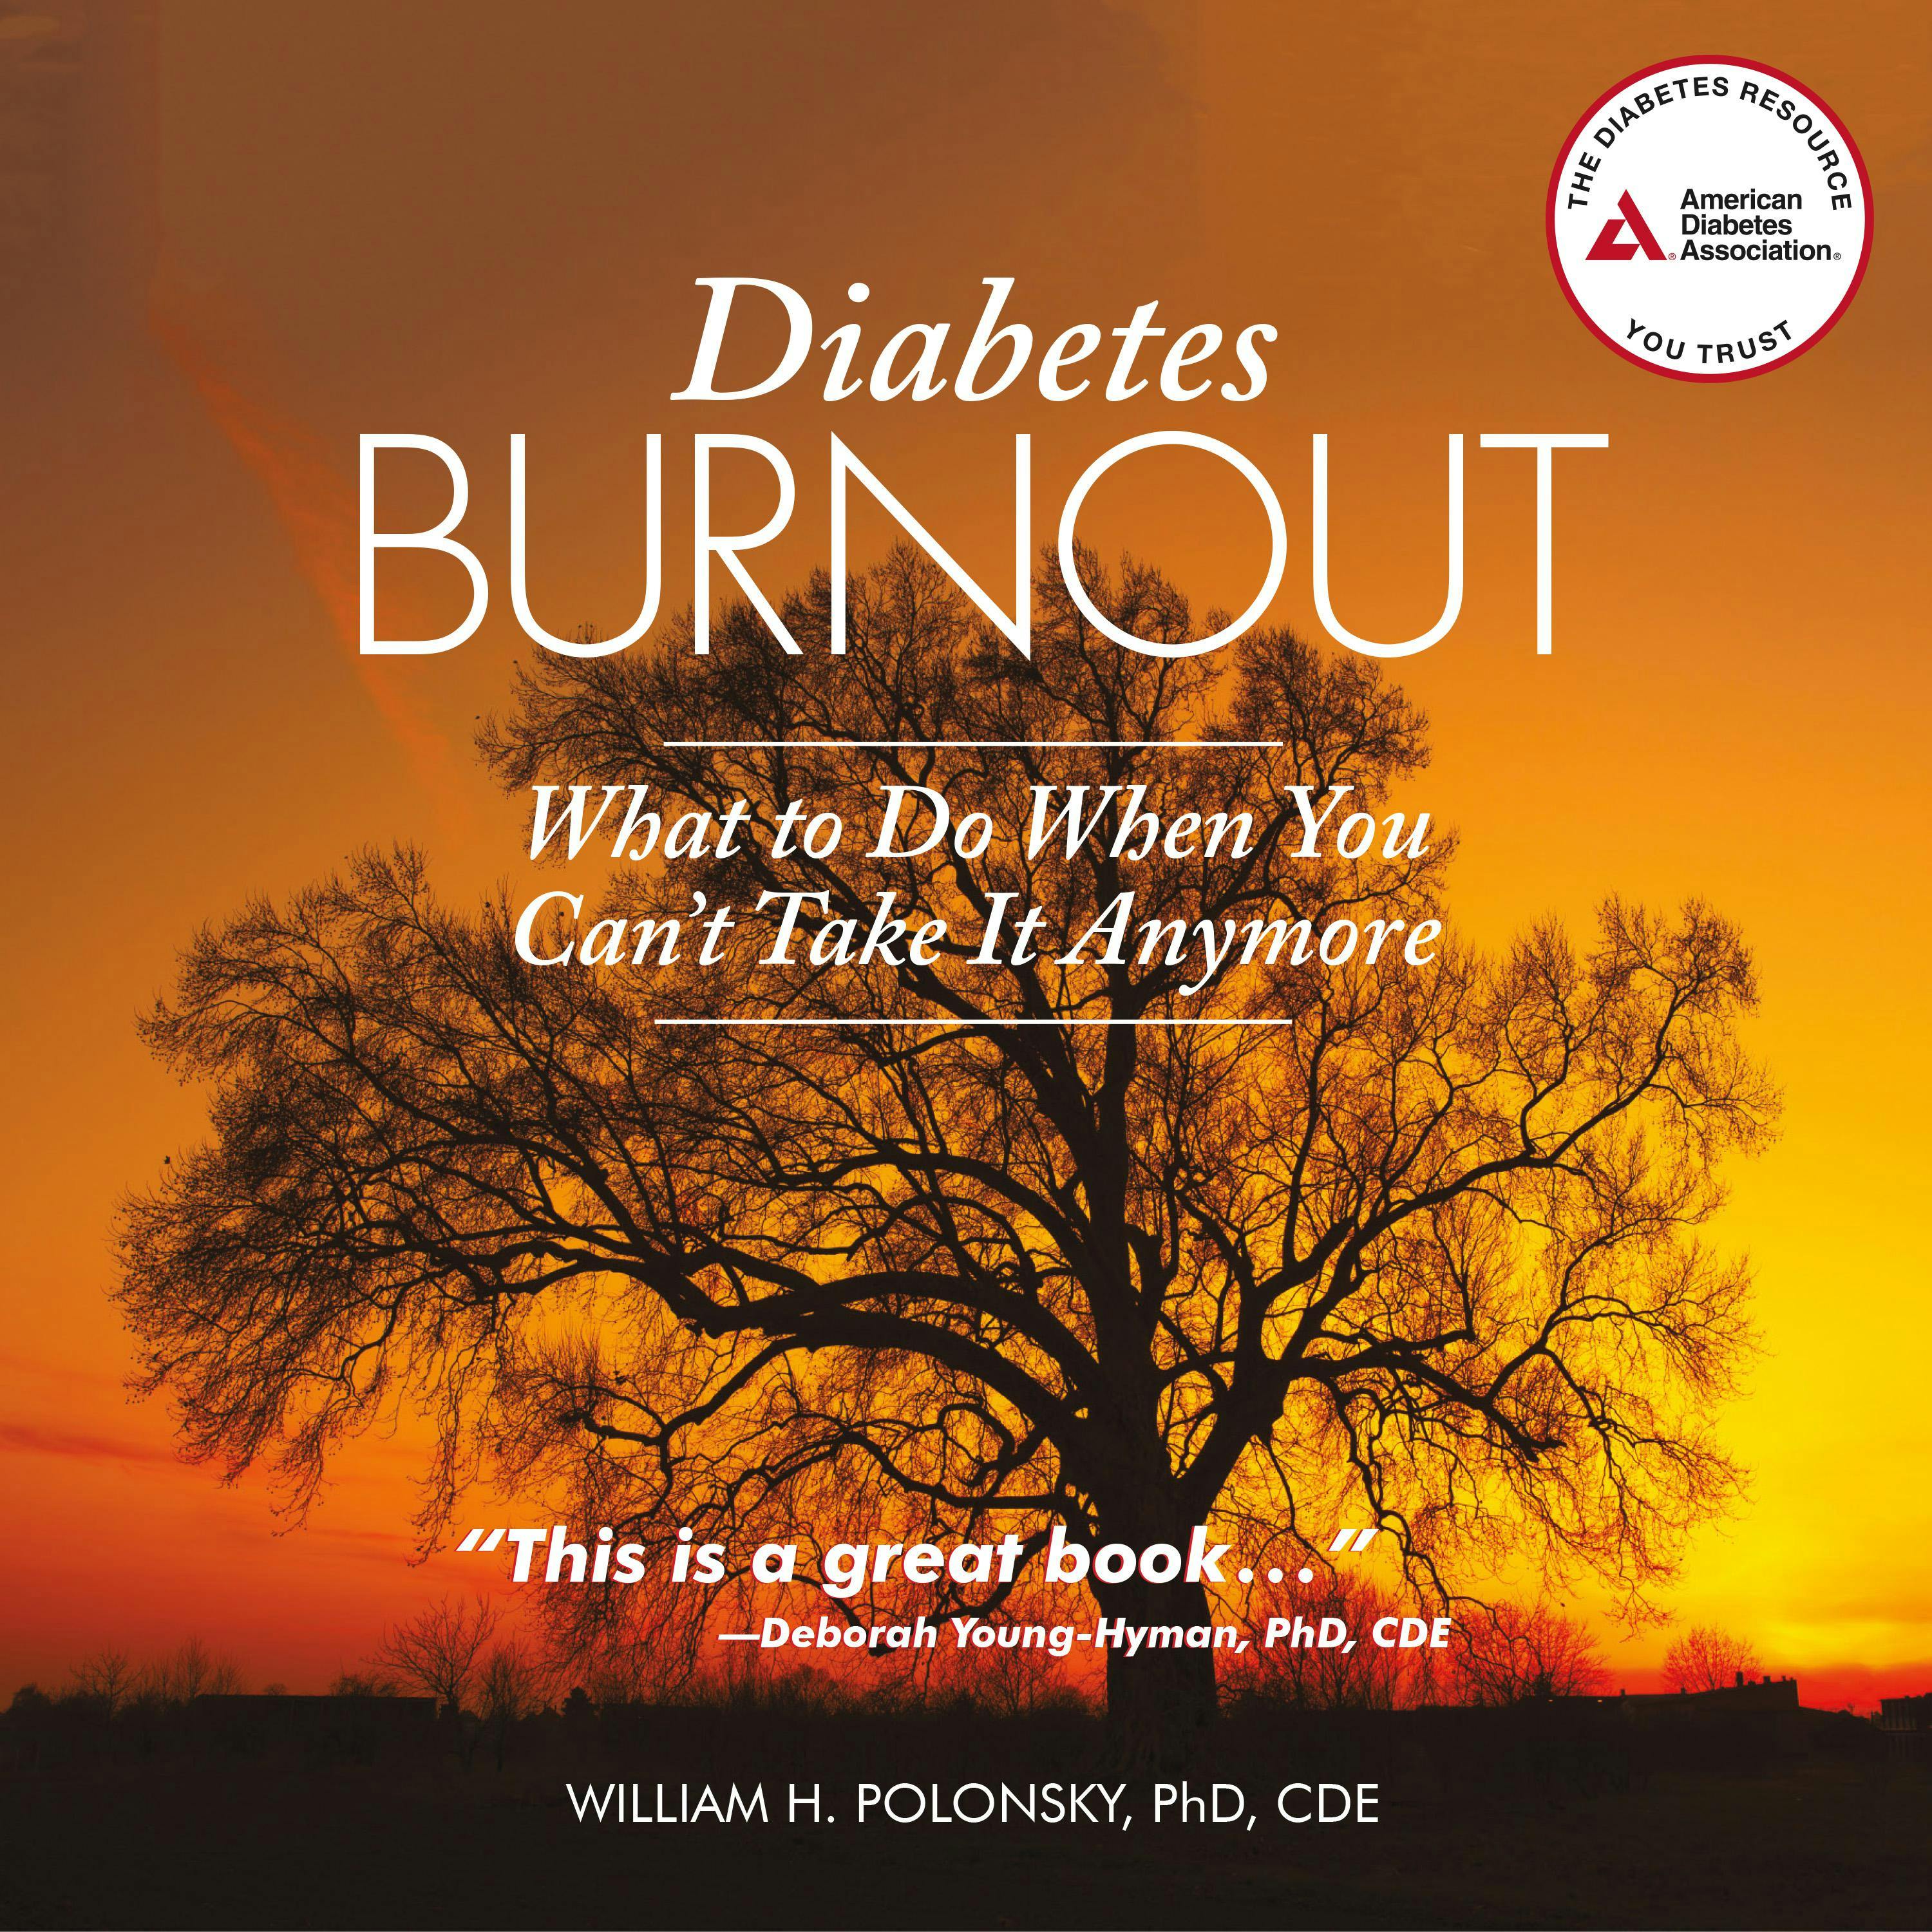 Diabetes Burnout: What to Do When You Can't Take It Anymore - undefined